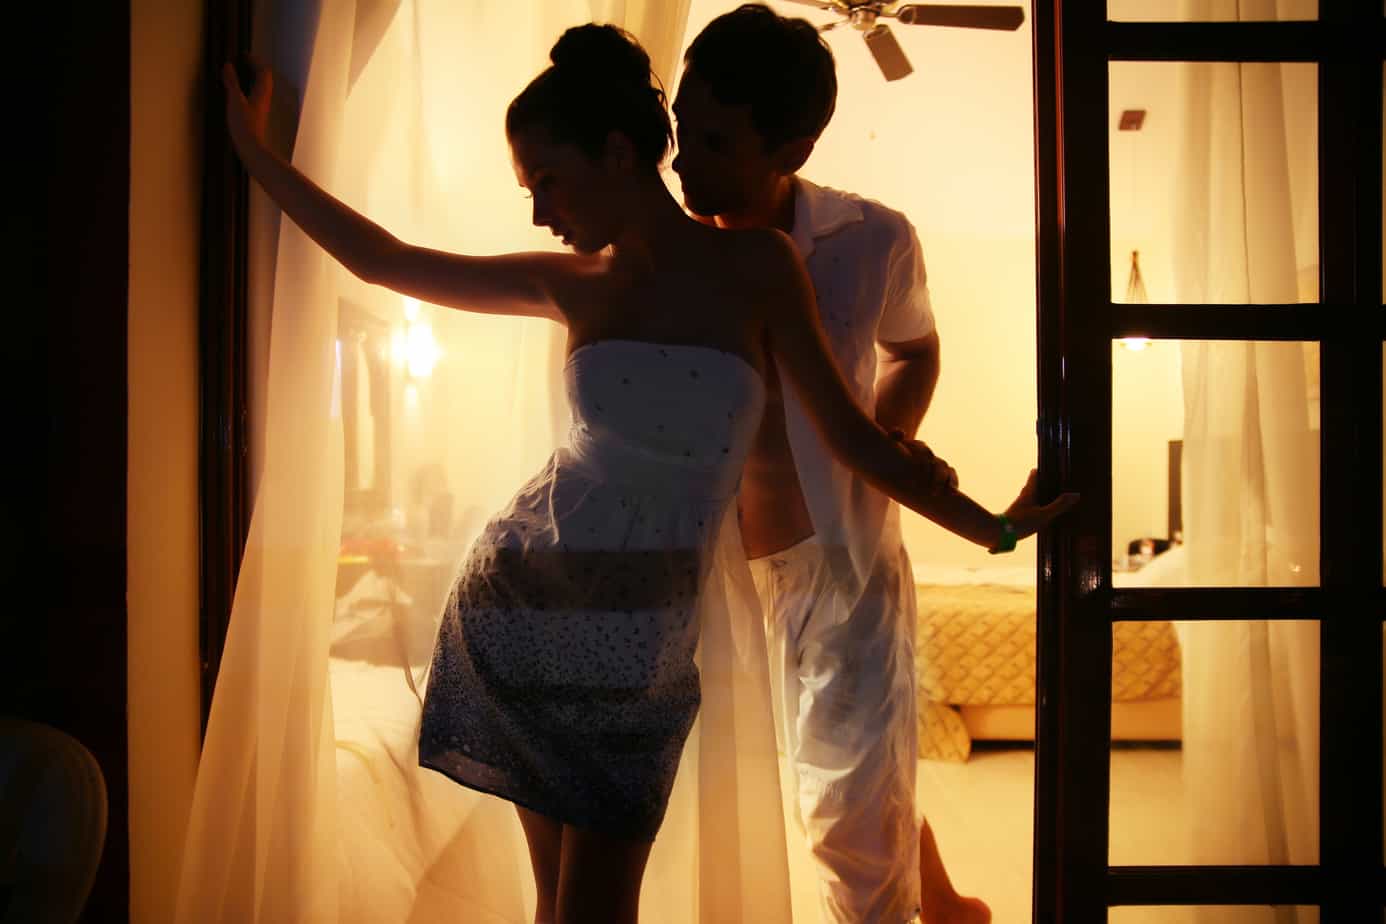 sexy date ideas - couple silhouetted against golden light, standing on hotel balcony